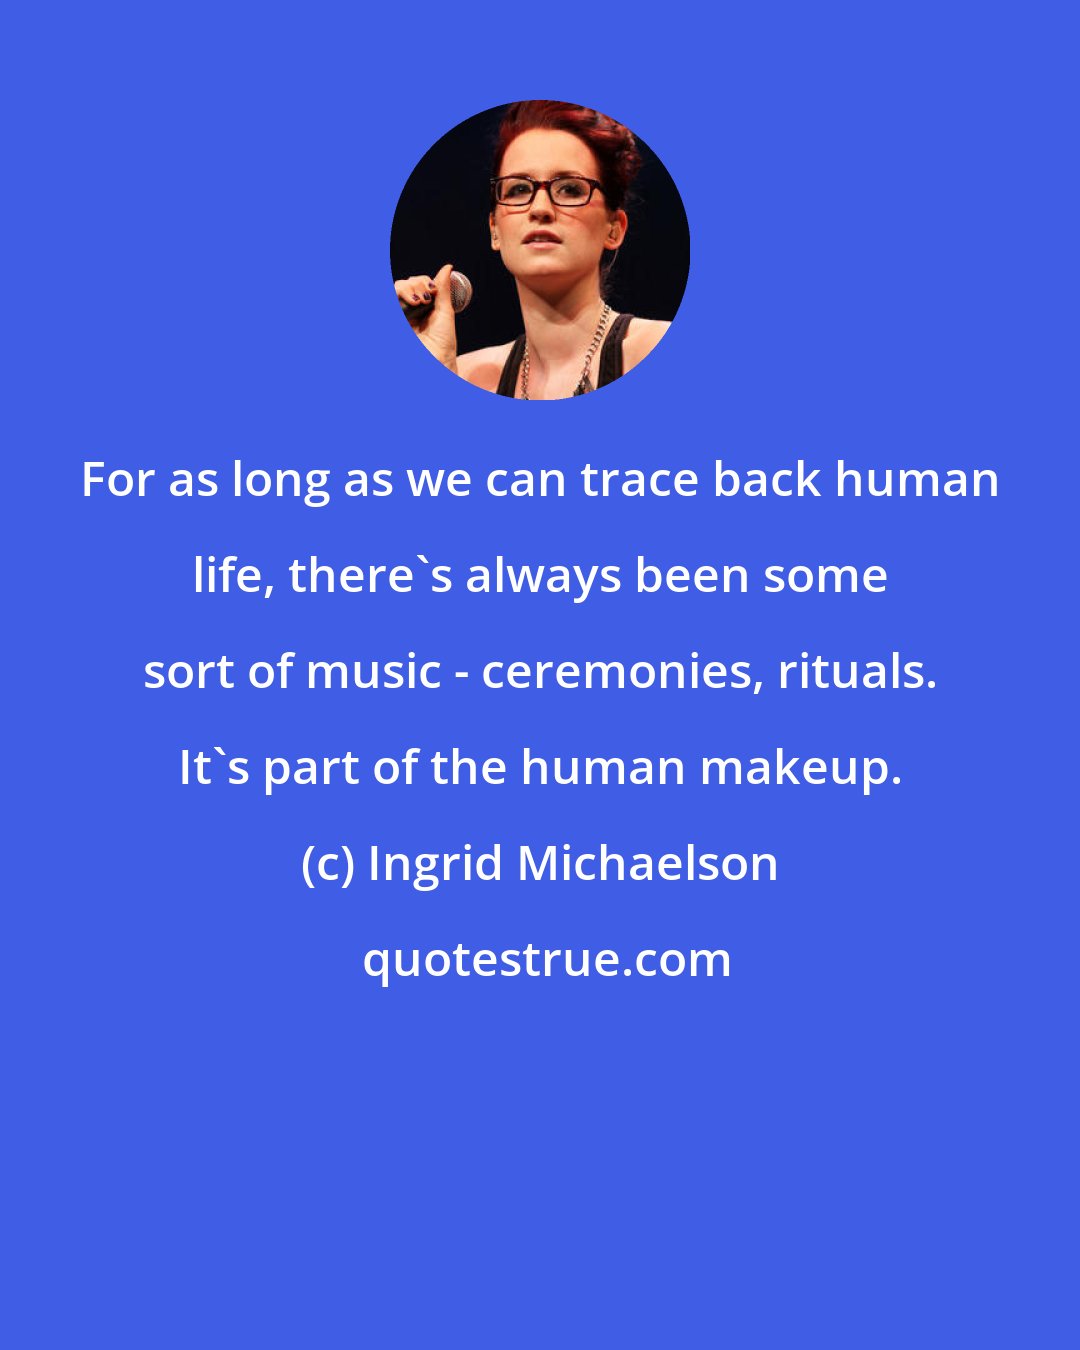 Ingrid Michaelson: For as long as we can trace back human life, there's always been some sort of music - ceremonies, rituals. It's part of the human makeup.